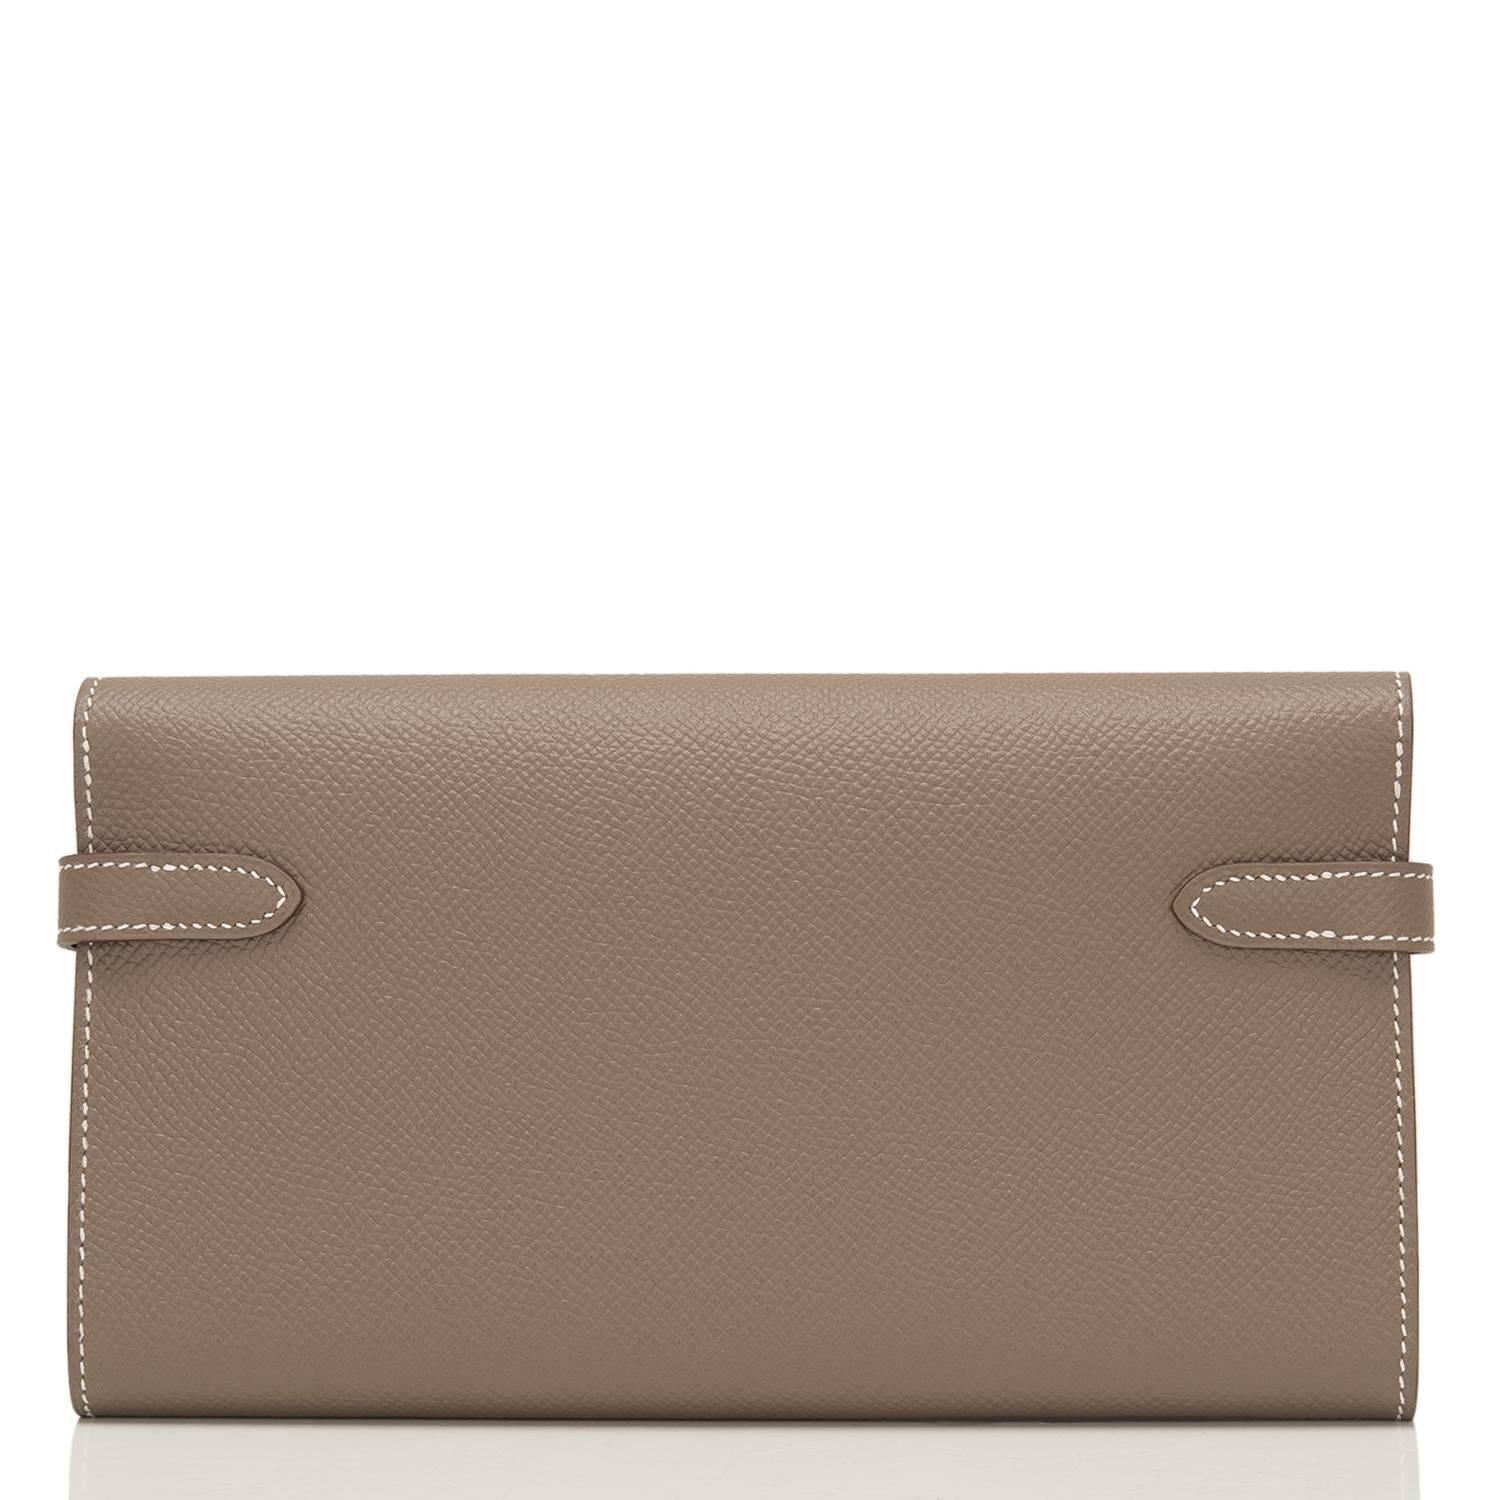 Hermes Etoupe Epsom Kelly Long Wallet In New Condition For Sale In New York, NY